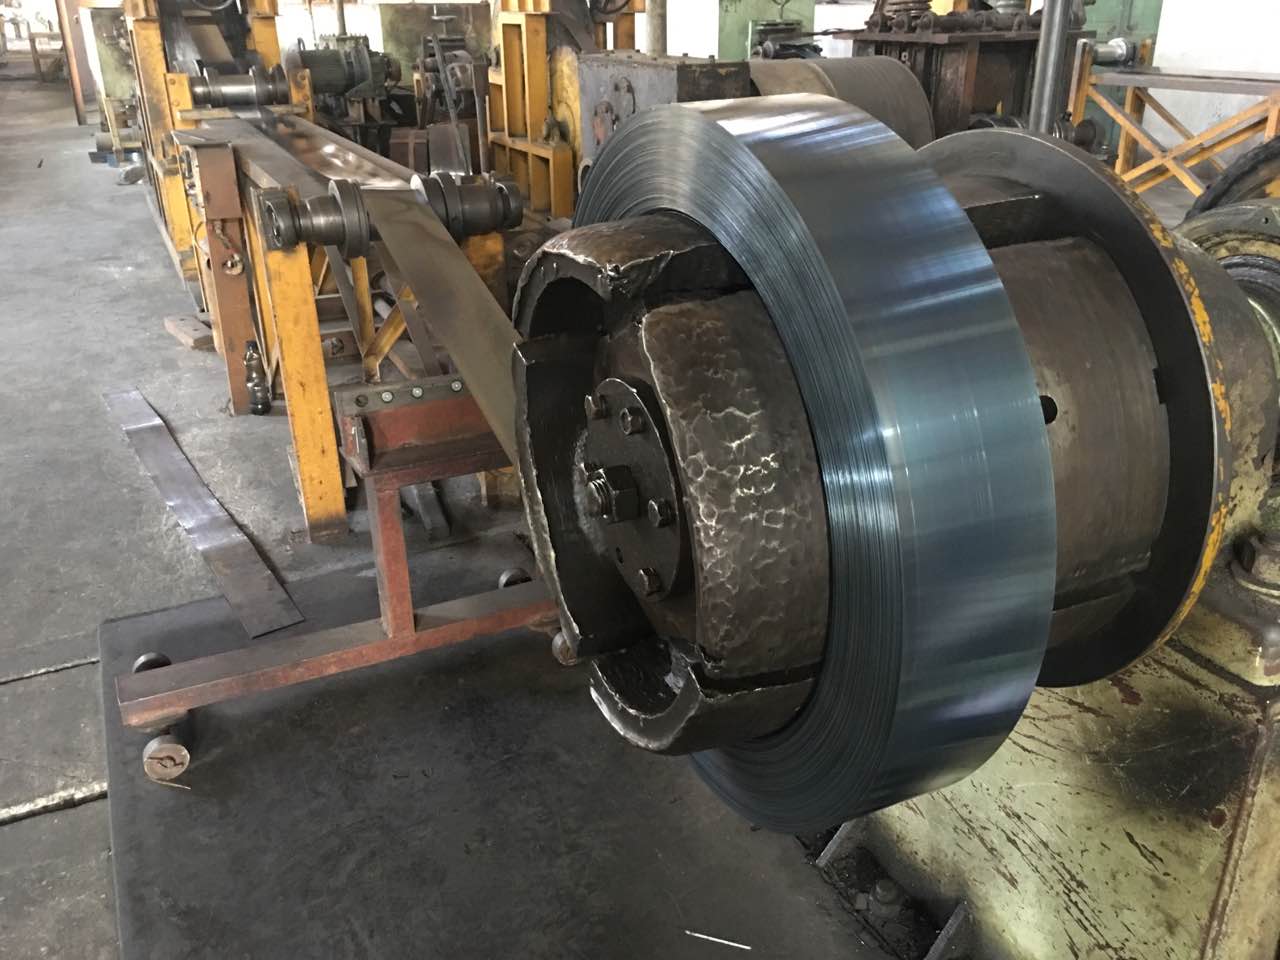 Hardened and Tempered Steel Strip